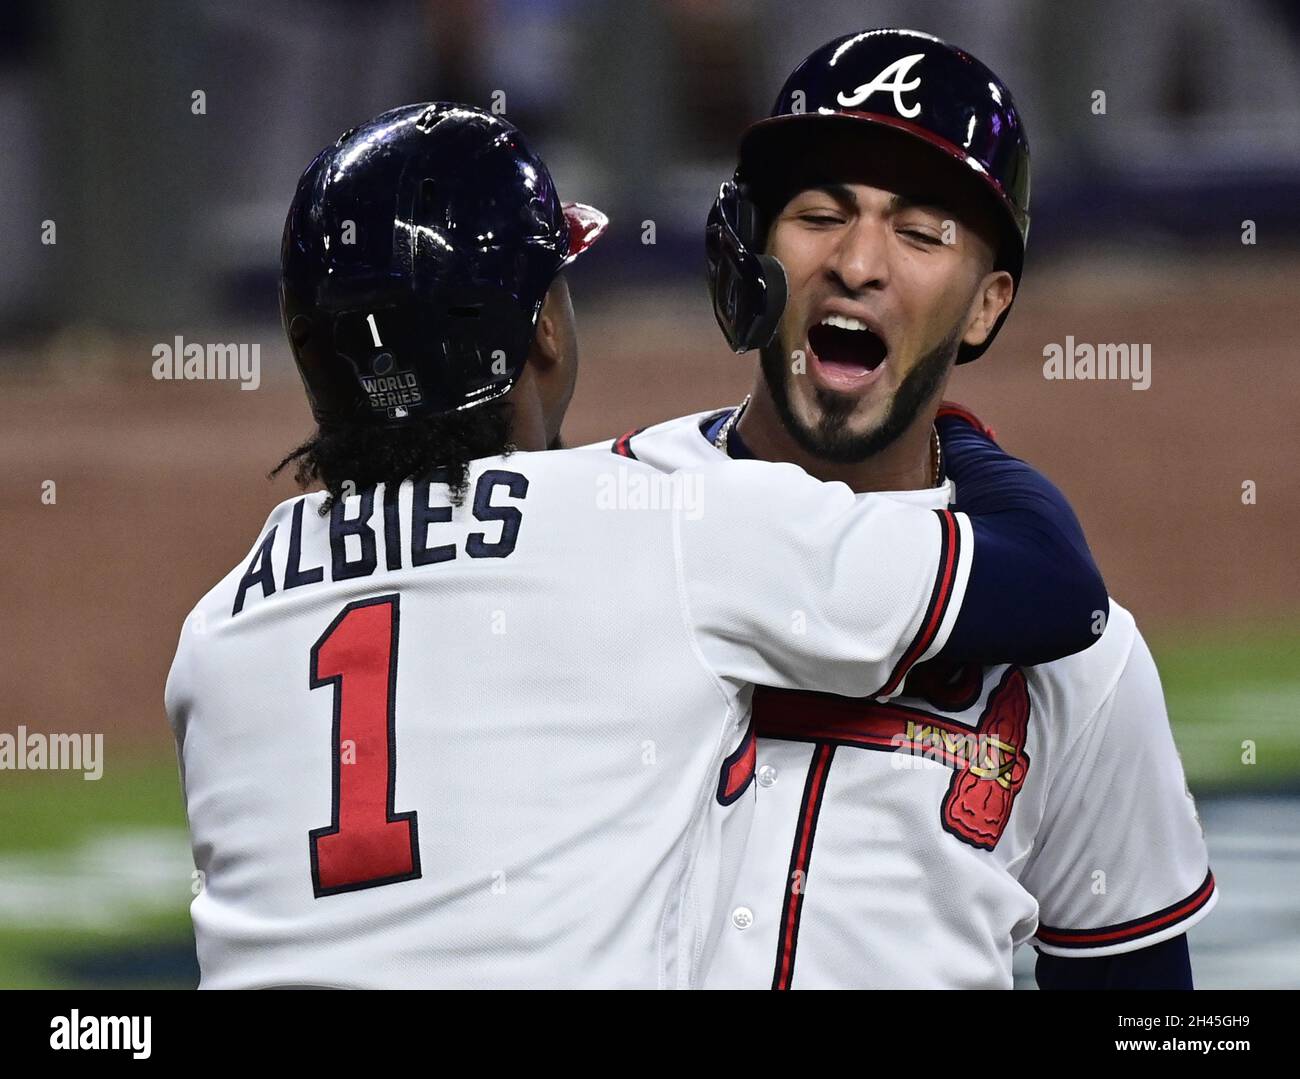 Atlanta, United States. 31st Oct, 2021. Atlanta Braves center fielder Adam  Duvall (14) celebrates with teammates Eddie Rosario (C) and Ozzie Albies  after hitting a grand slam homer against the Houston Astros